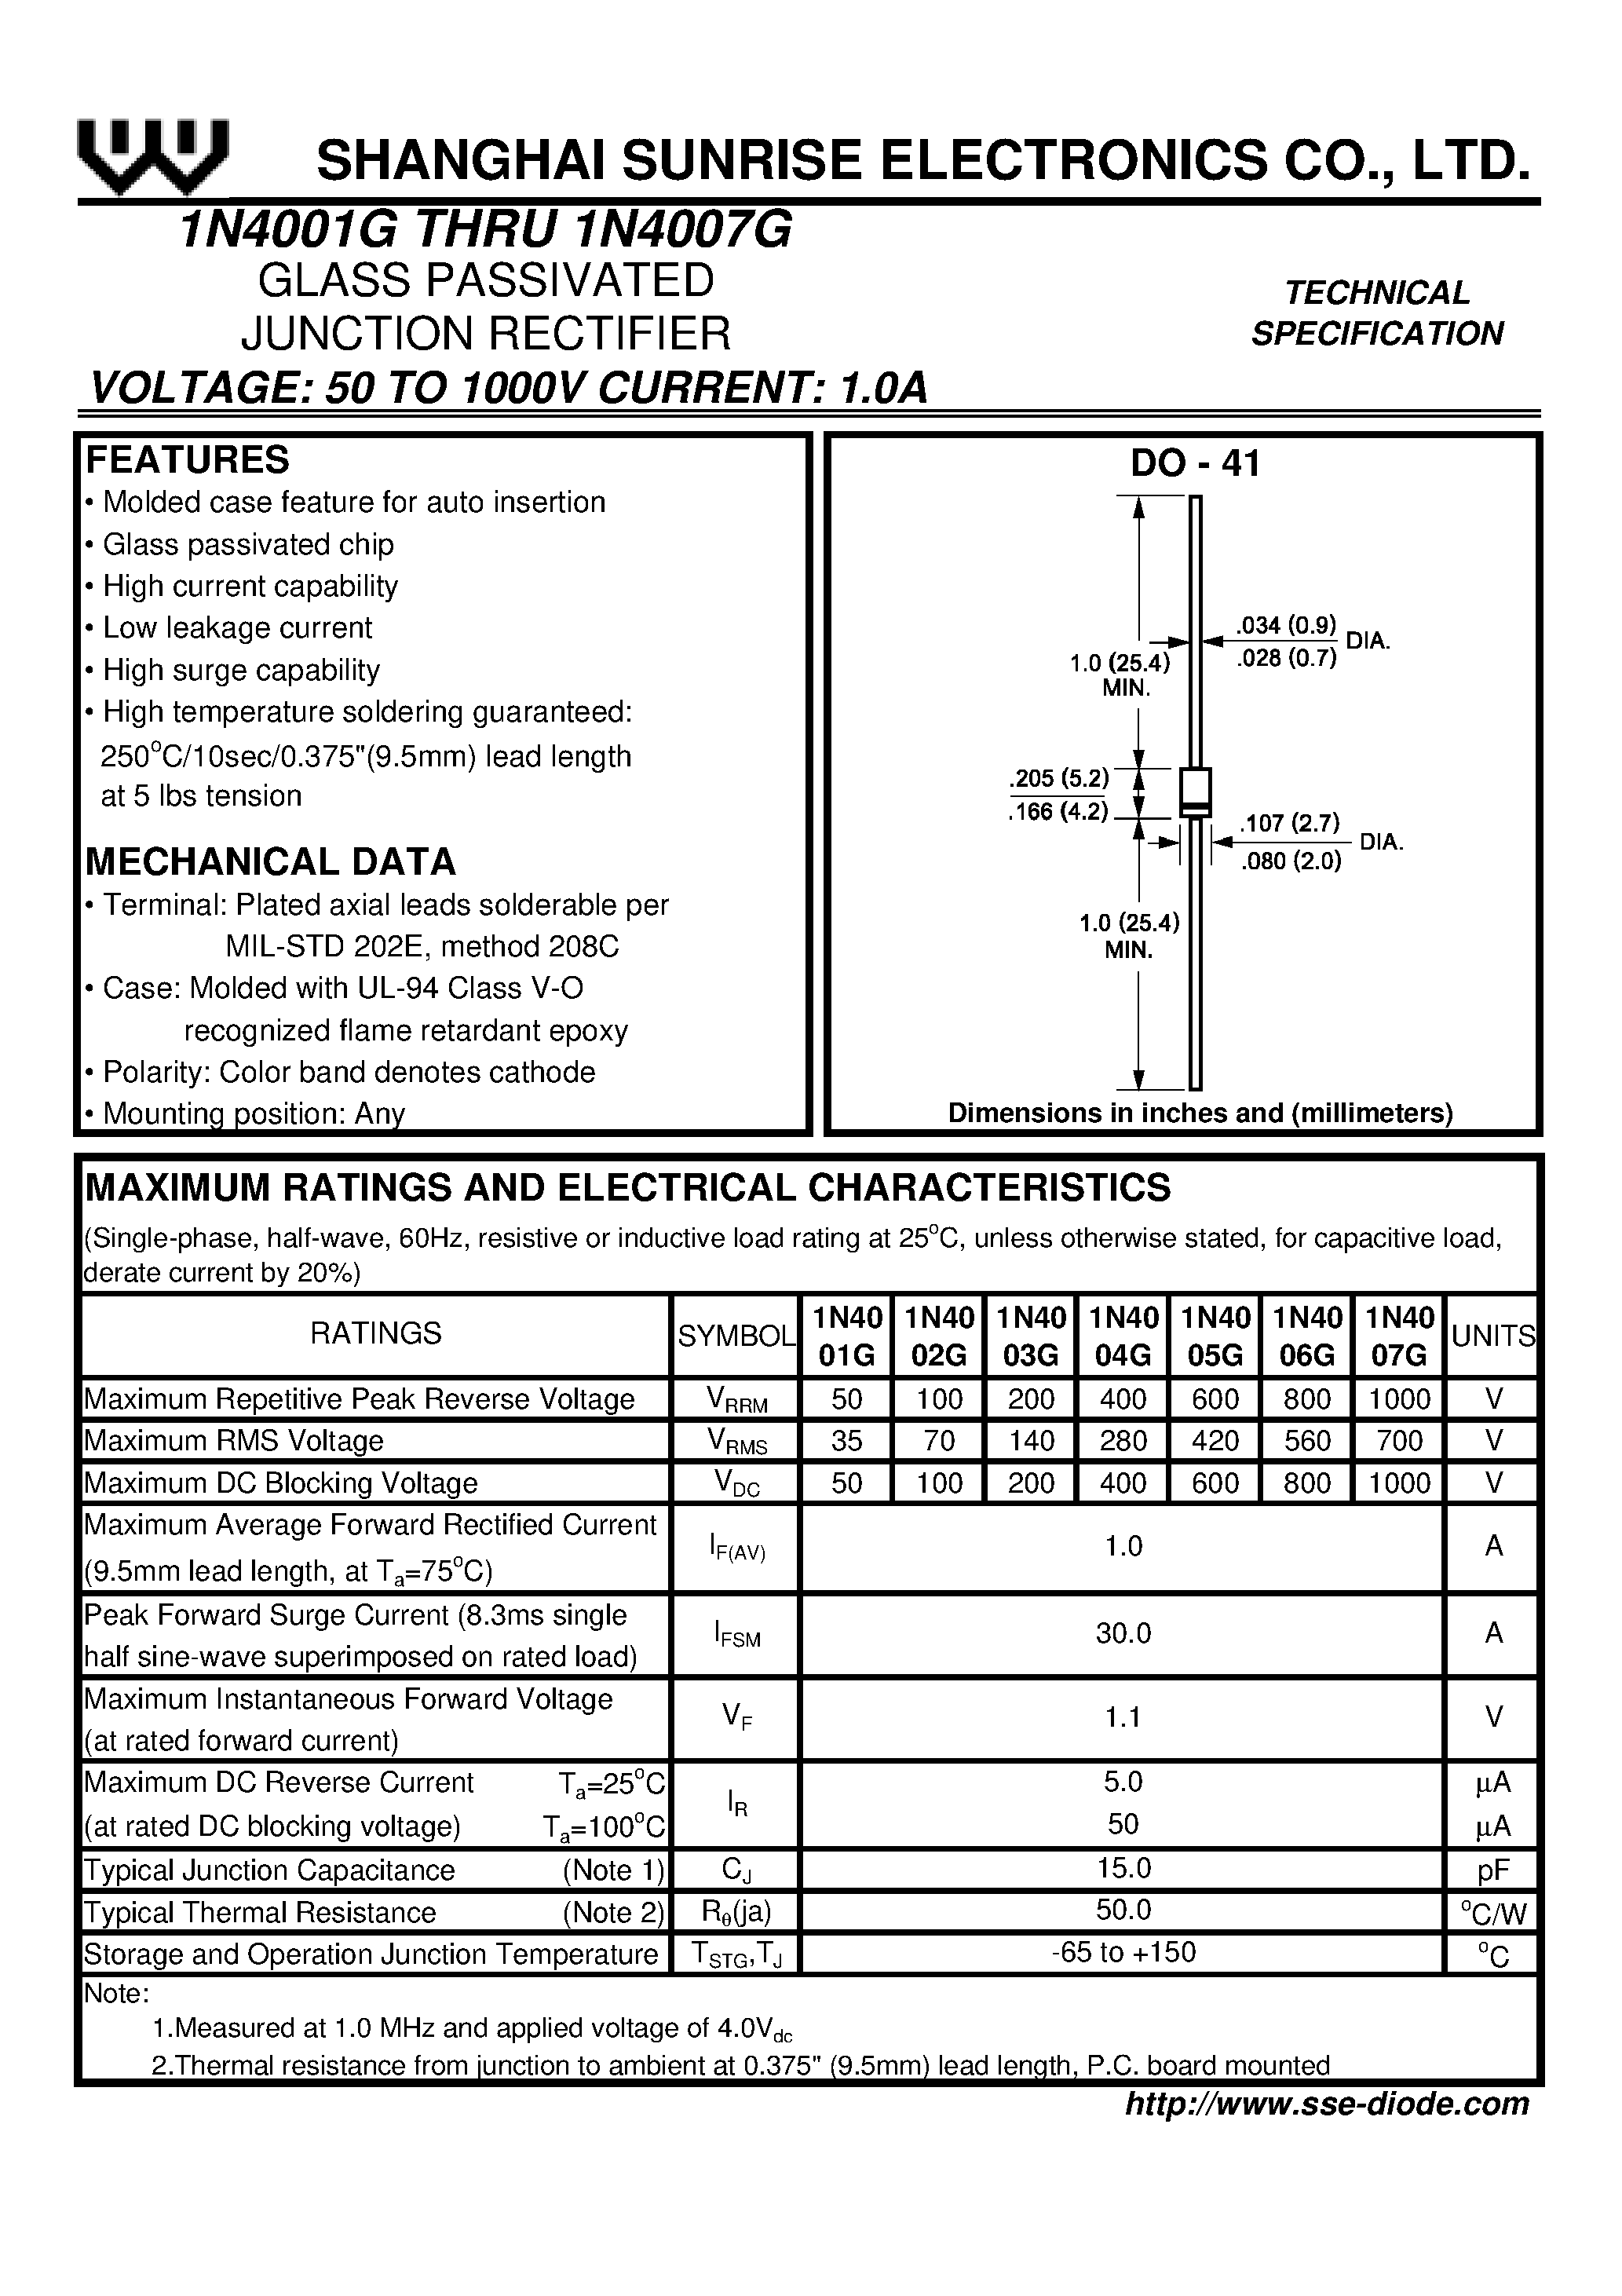 Datasheet 1N4001G - (1N4001G - 1N4007G) GLASS PASSIVATED JUNCTION RECTIFIER page 1